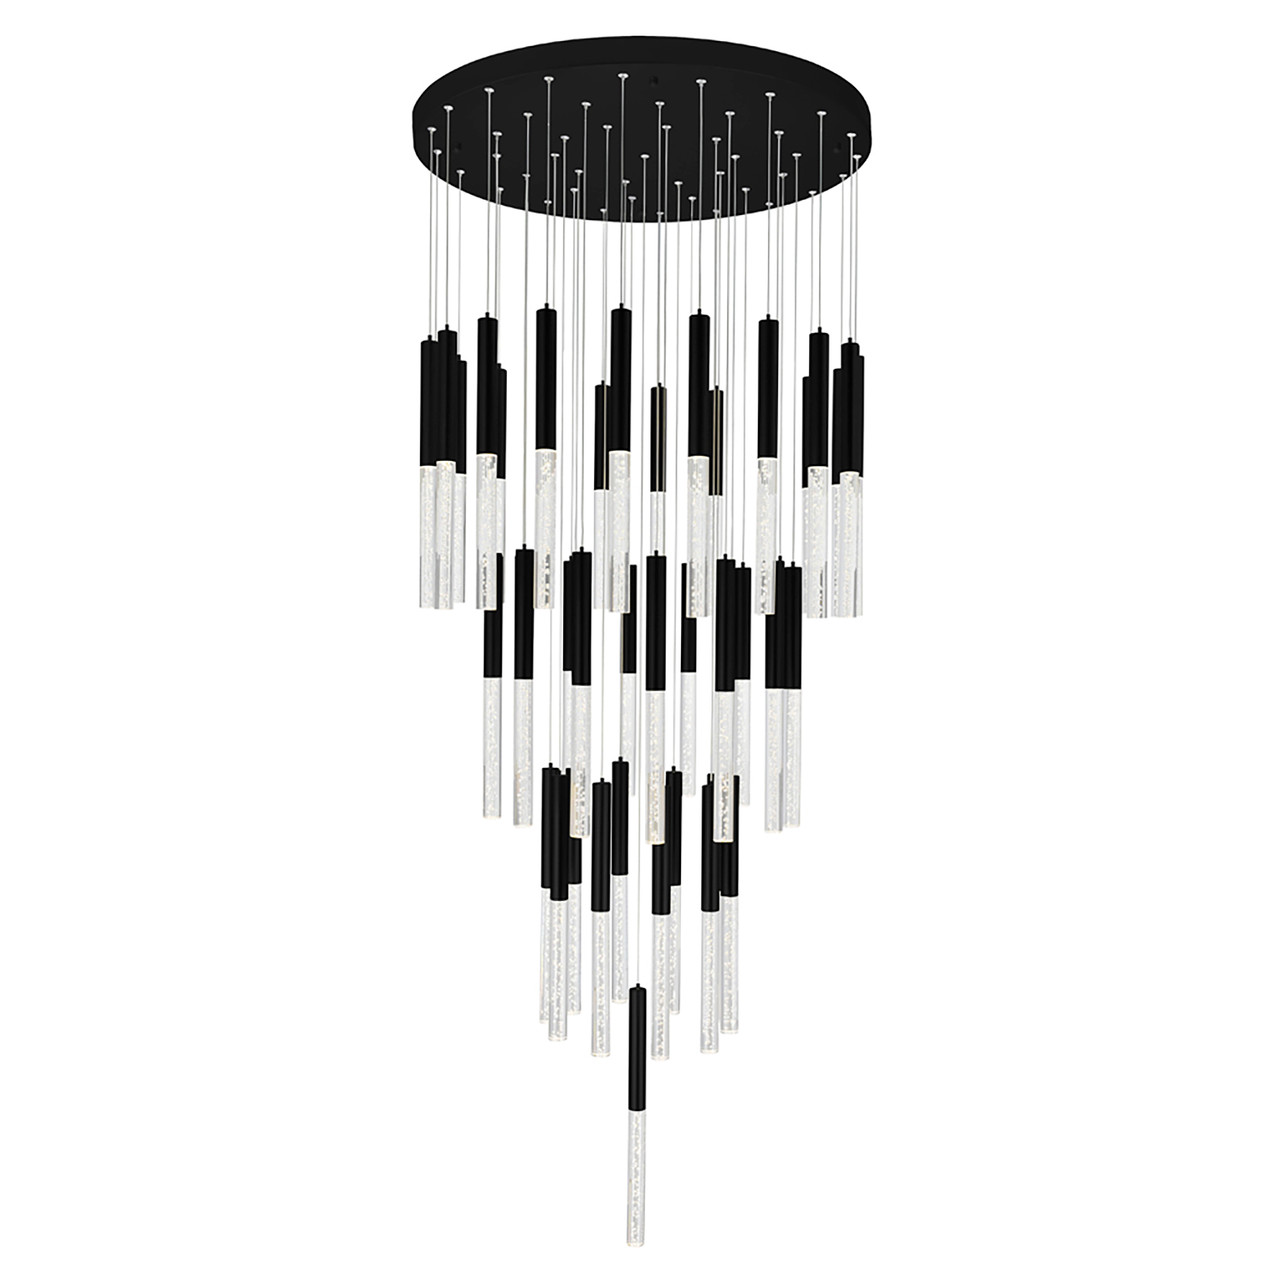 CWI LIGHTING 1703P32-45-101 Dragonswatch LED Integrated Chandelier with Black Finish